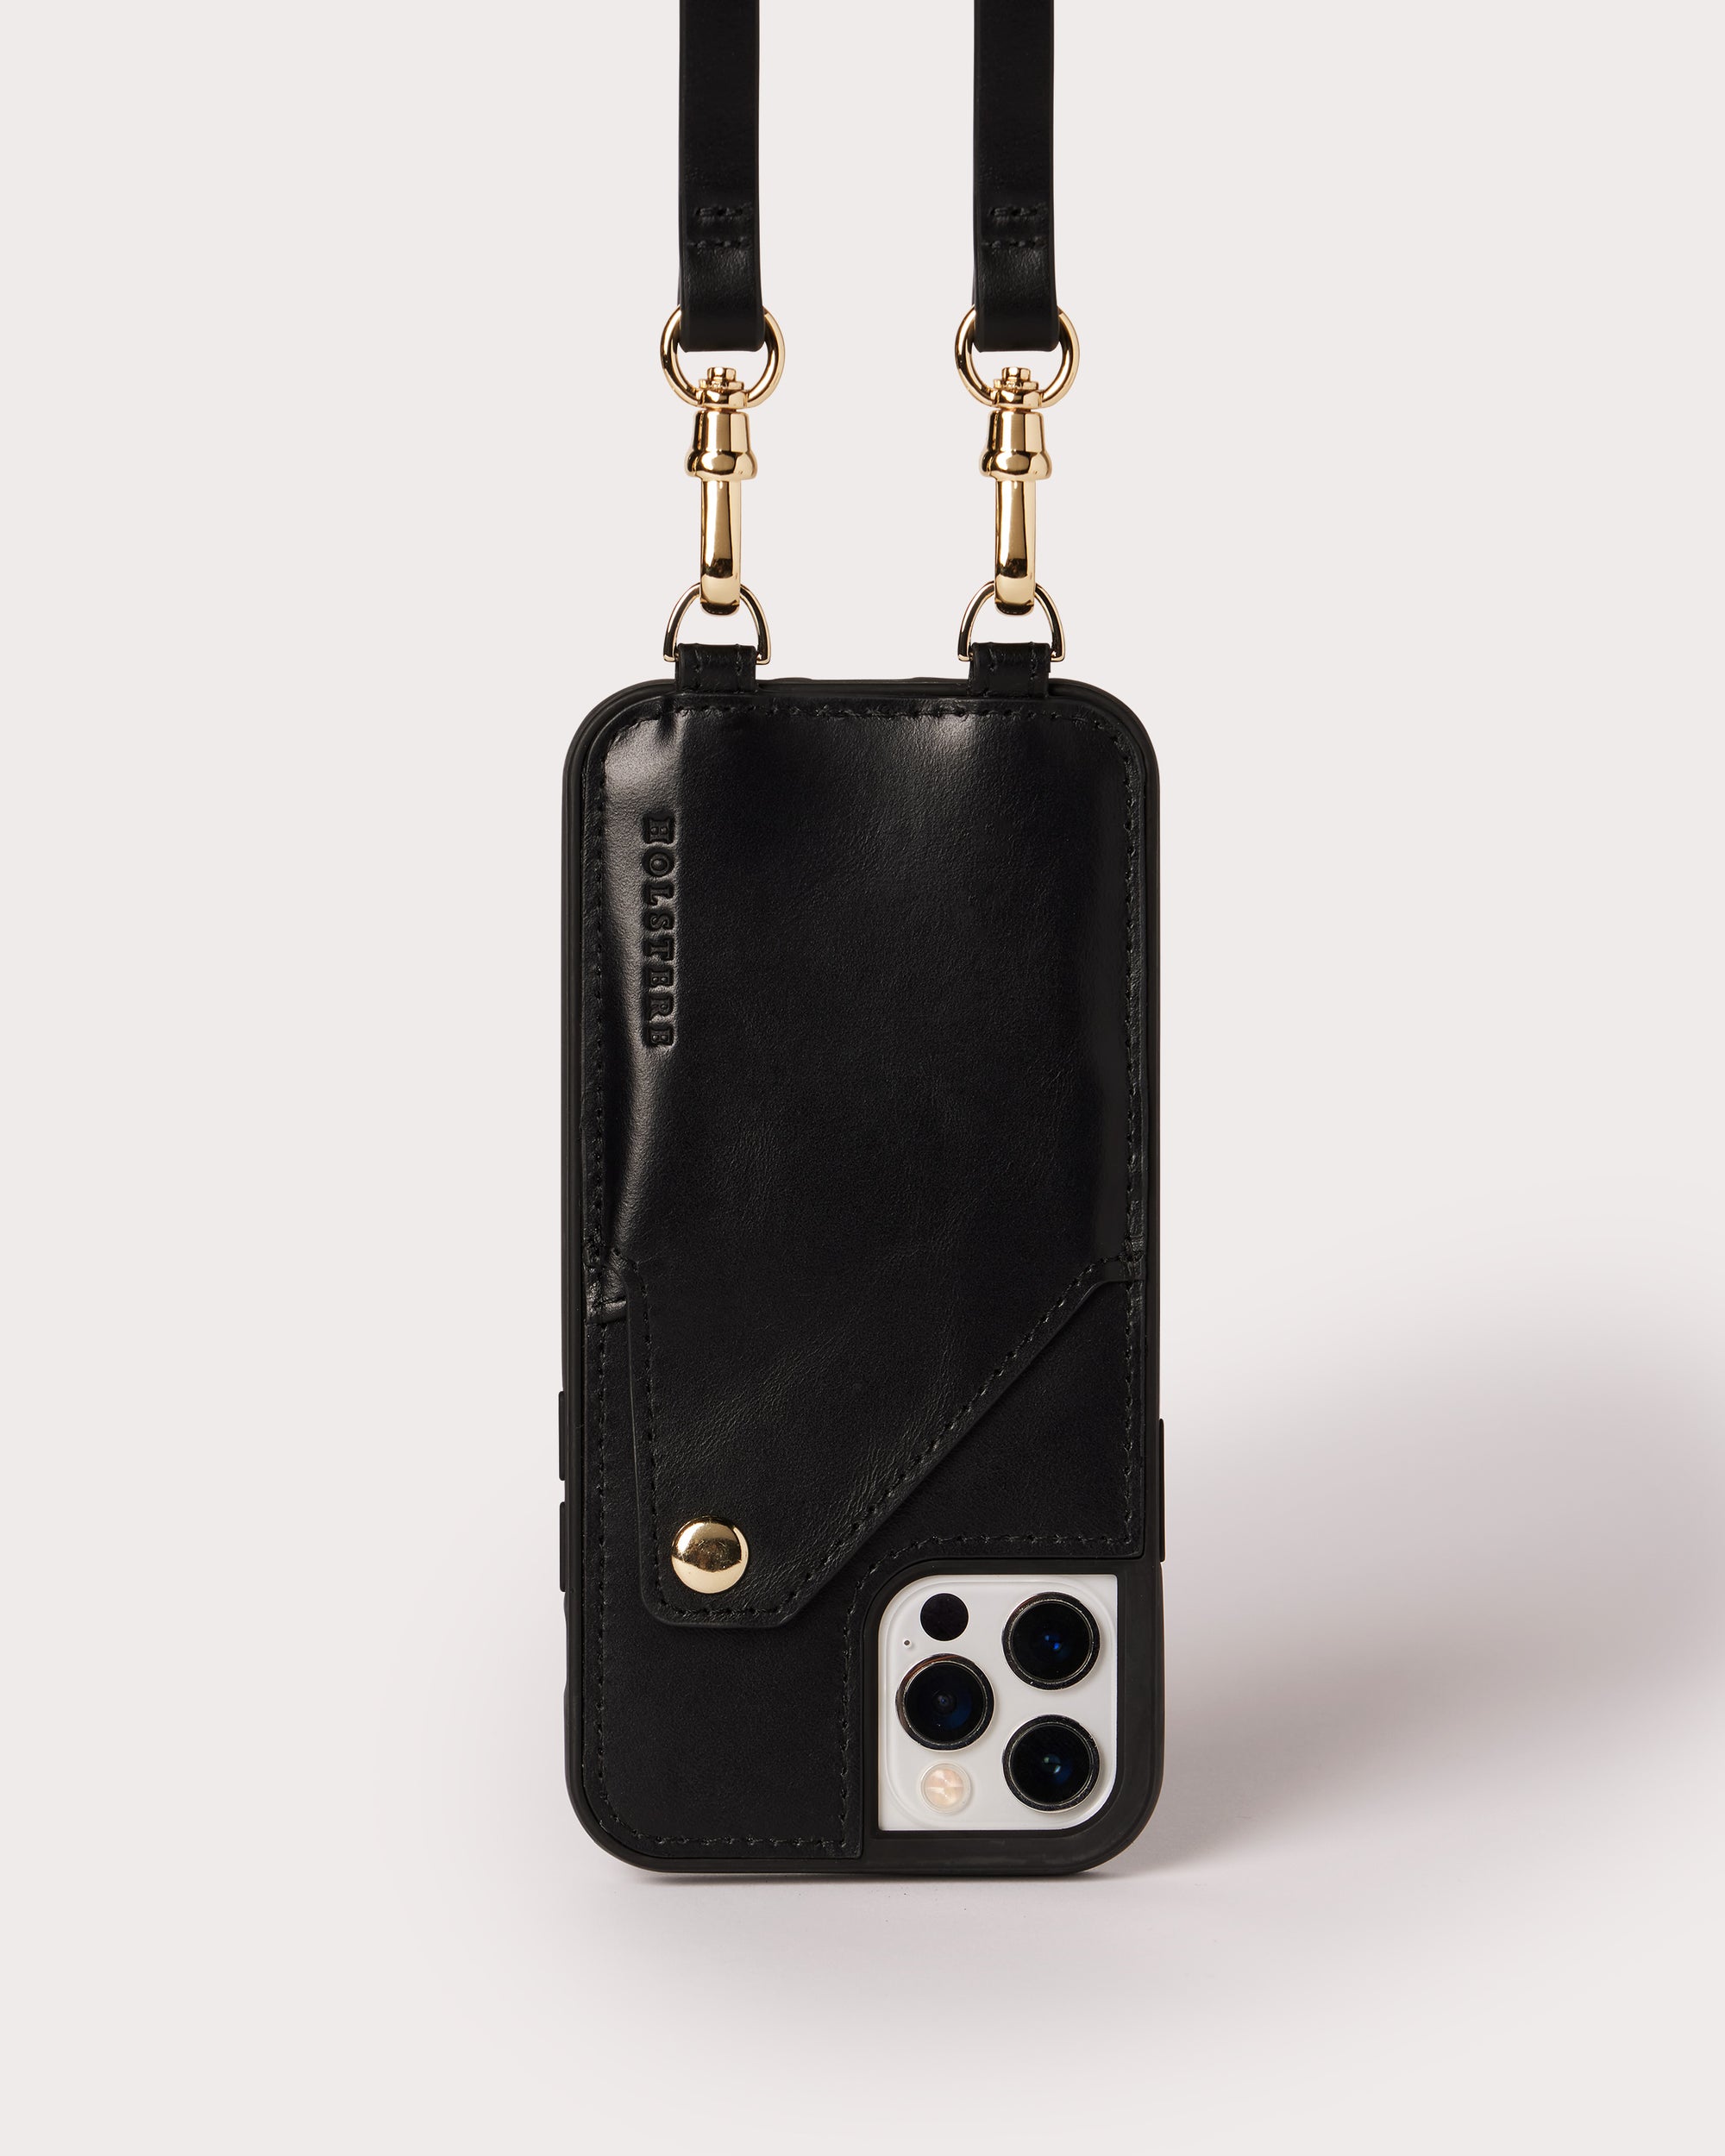 Holstere Genuine Leather iPhone Case Crossbody Phone Purse Cross Body Holster Clip for Easy Carry Hands Free - Real Black Smooth Leather Snap In Phone Case with Wallet Credit Card ID Sleeve, Snap Shut Button, and Adjustable Length Shoulder Strap with Gold Hardware. iPhone Leash for iPhone 6, 6s, 7, 8, 6 Plus, 7 Plus, 8 Plus, SE, X, 10, XS, XR, XS Max, 11, 11 Pro, 11 Pro Max, 12, 12 Pro, 12 Pro Max, 12 Mini, 13, 13 Pro, 13 Pro Max, 13 Mini